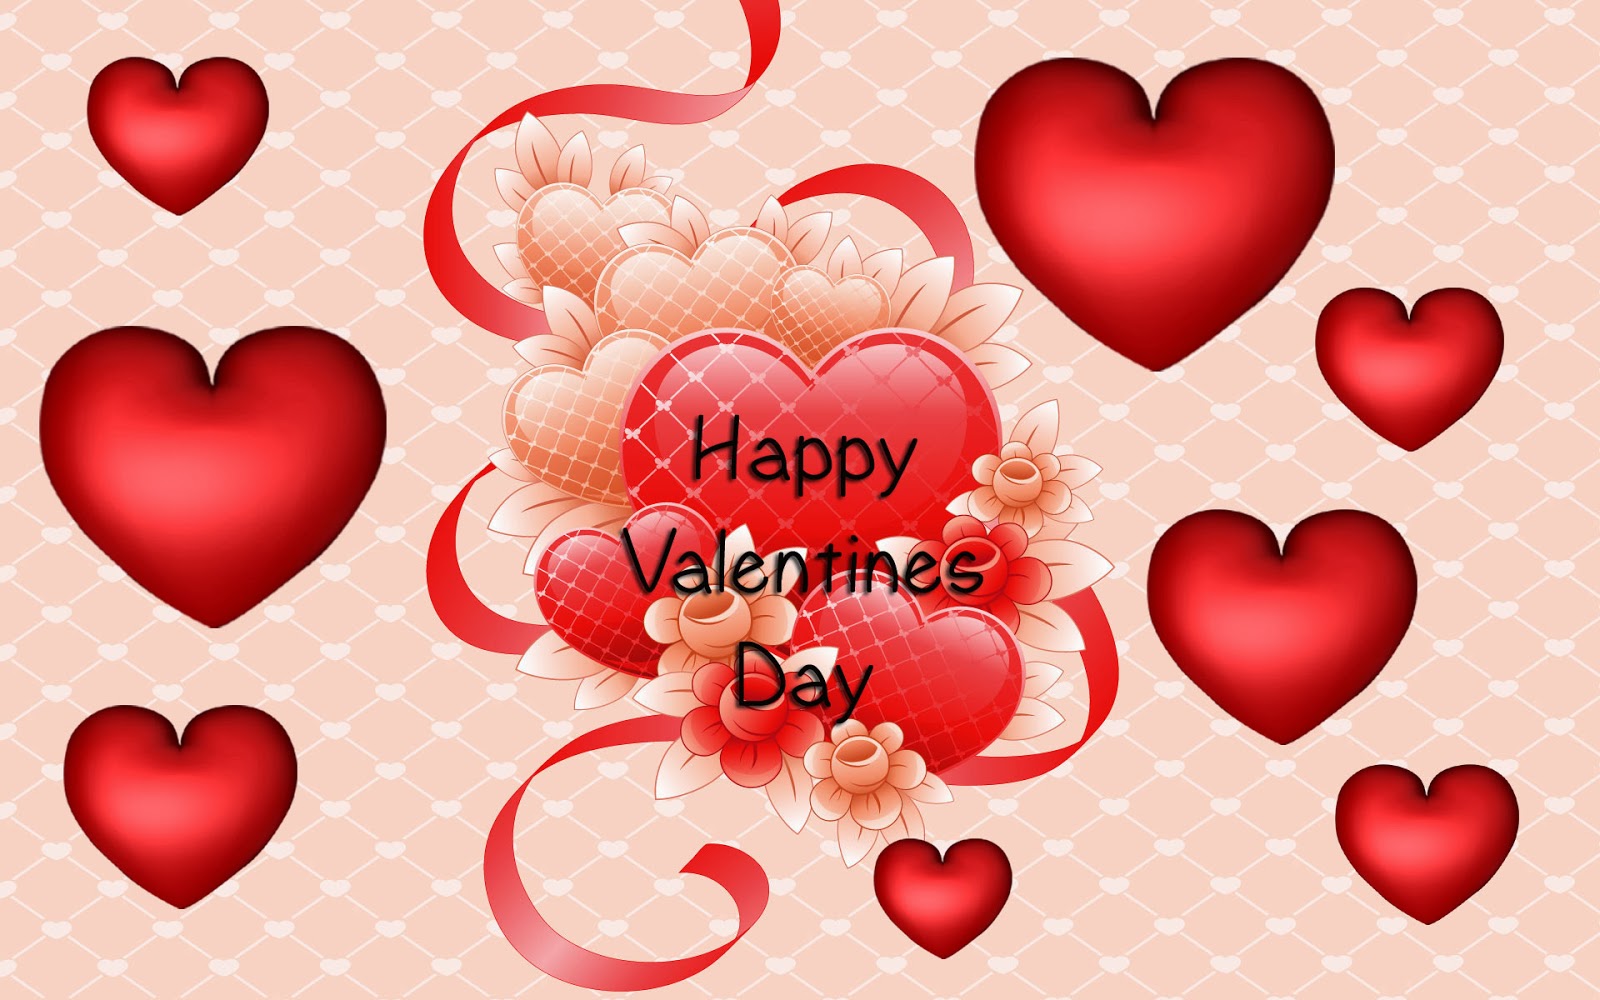 Valentines day HD Images with Red heart symbols Free Download